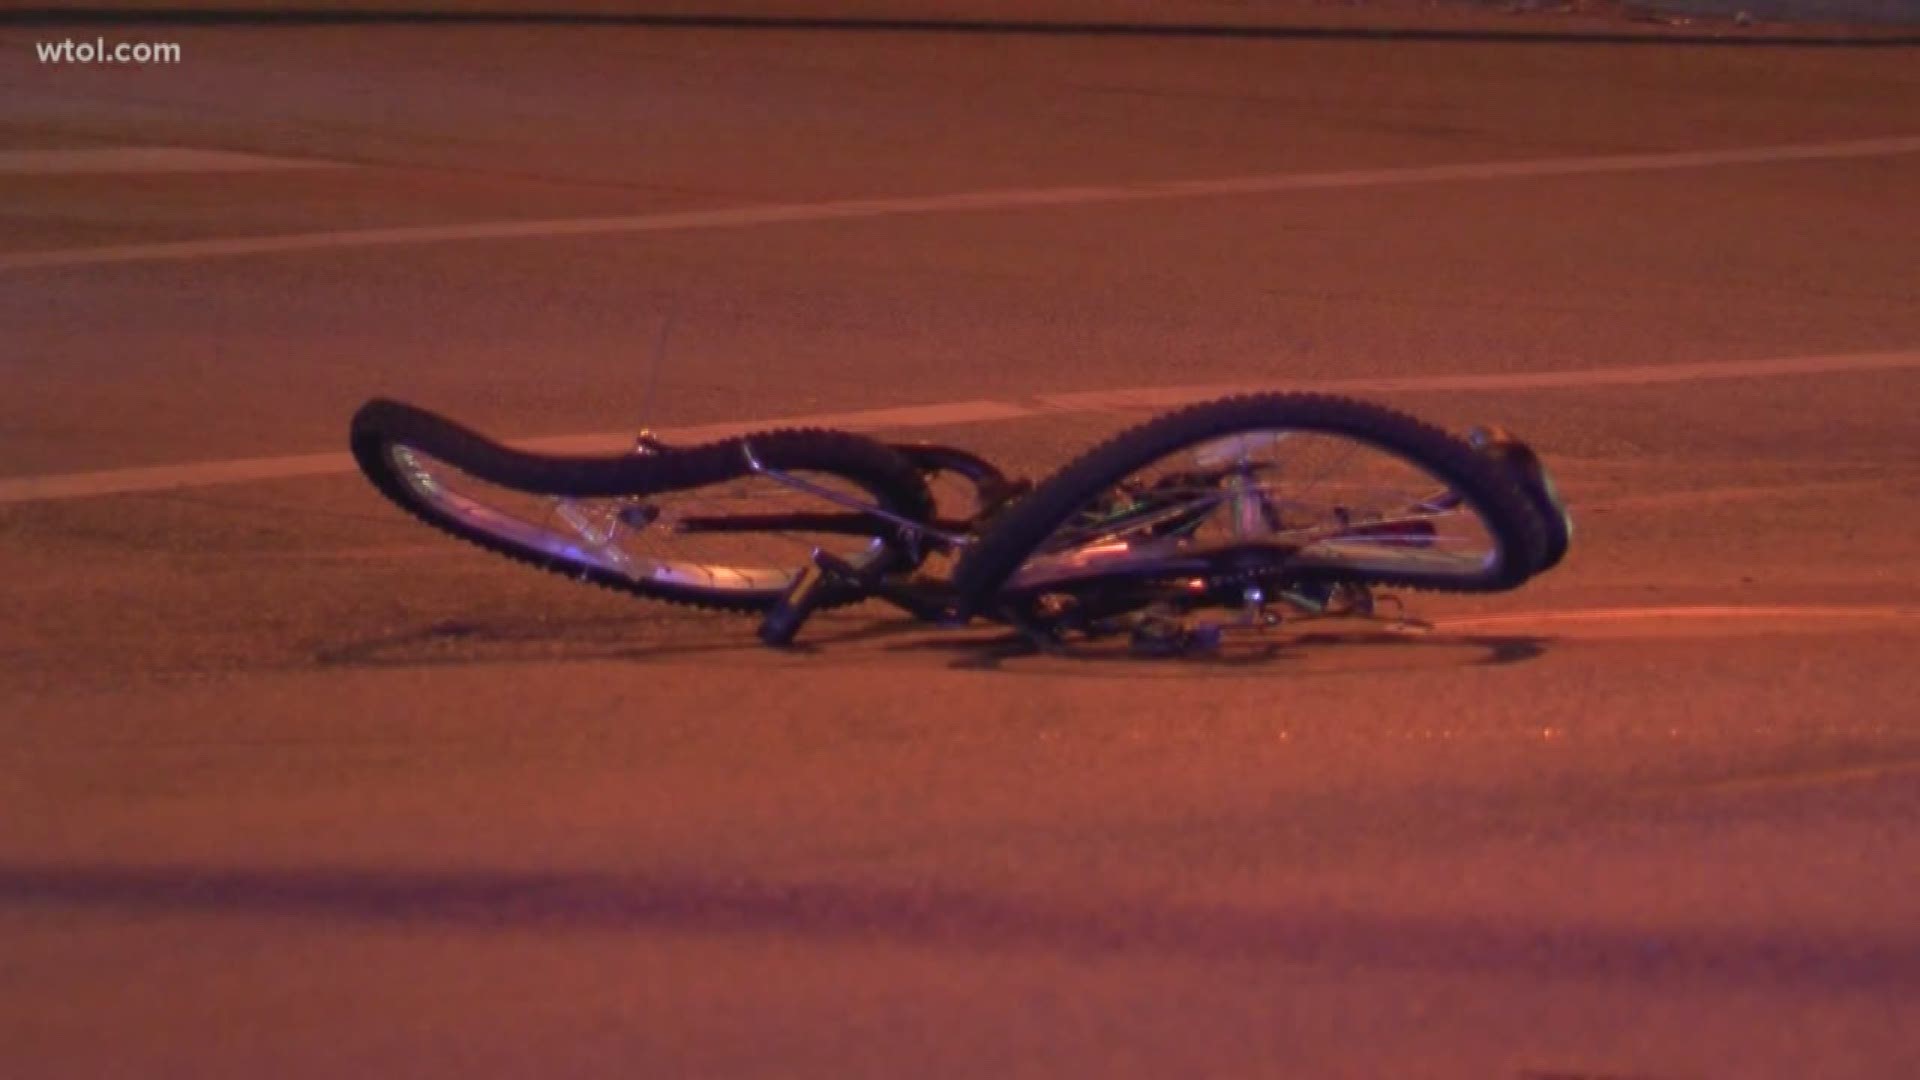 Bike rider was taken to a hospital and is expected to recover.